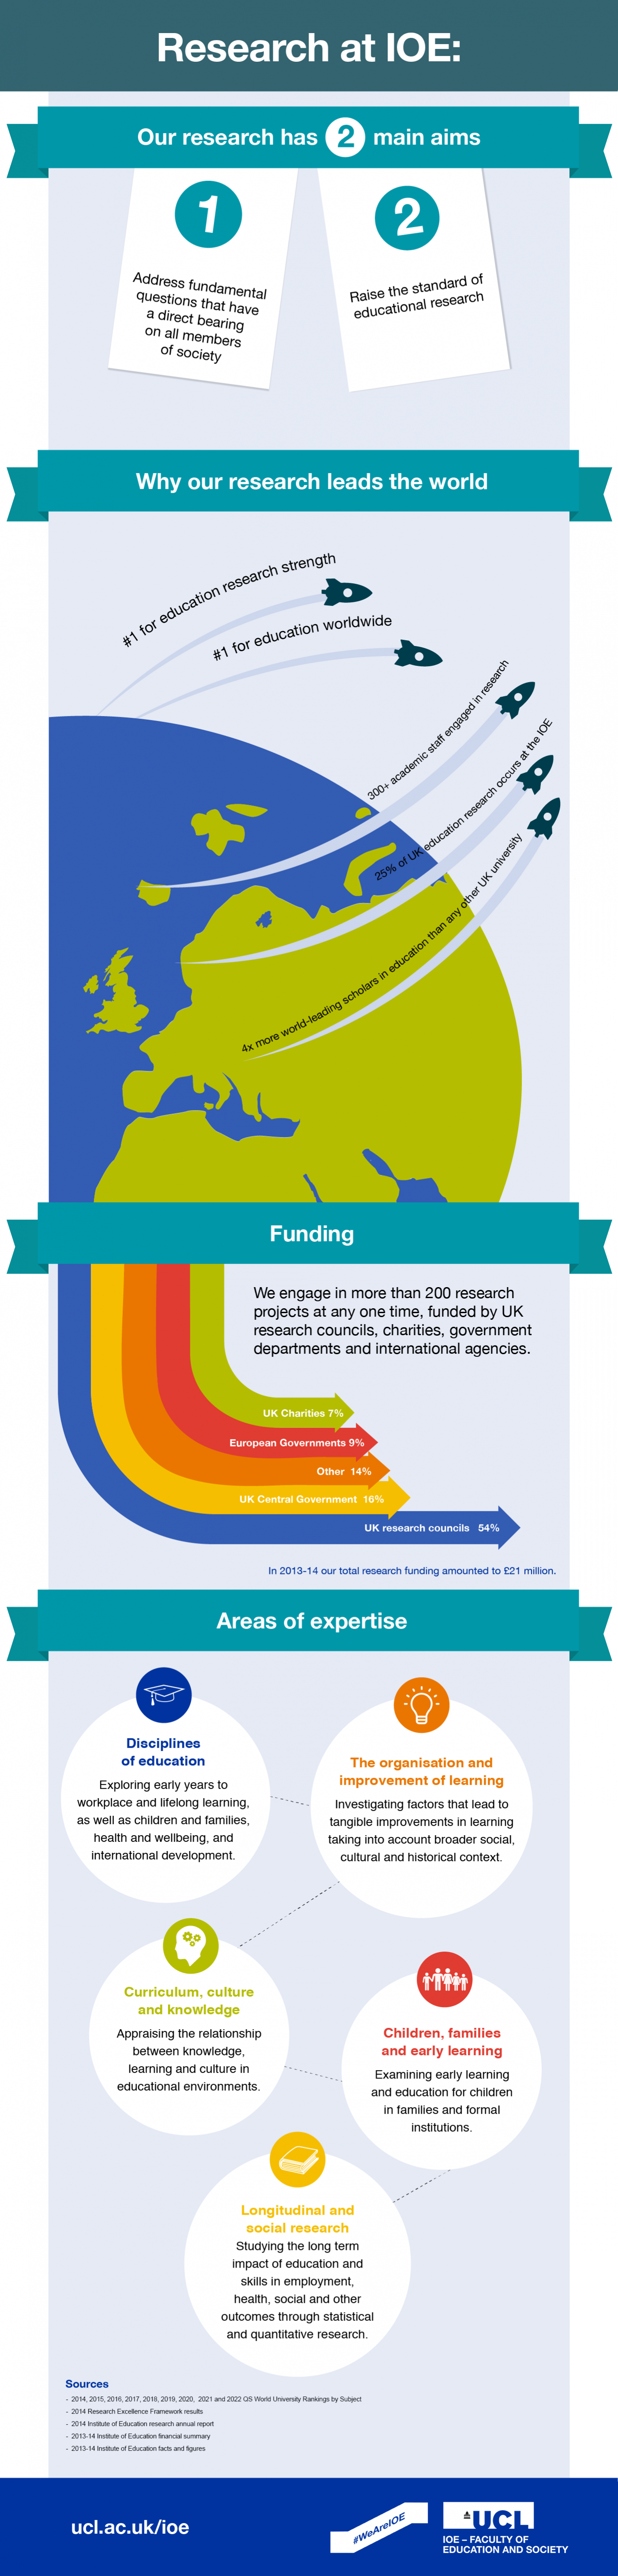 Infographic with key figures and features of research at IOE, UCL's Faculty of Education and Society